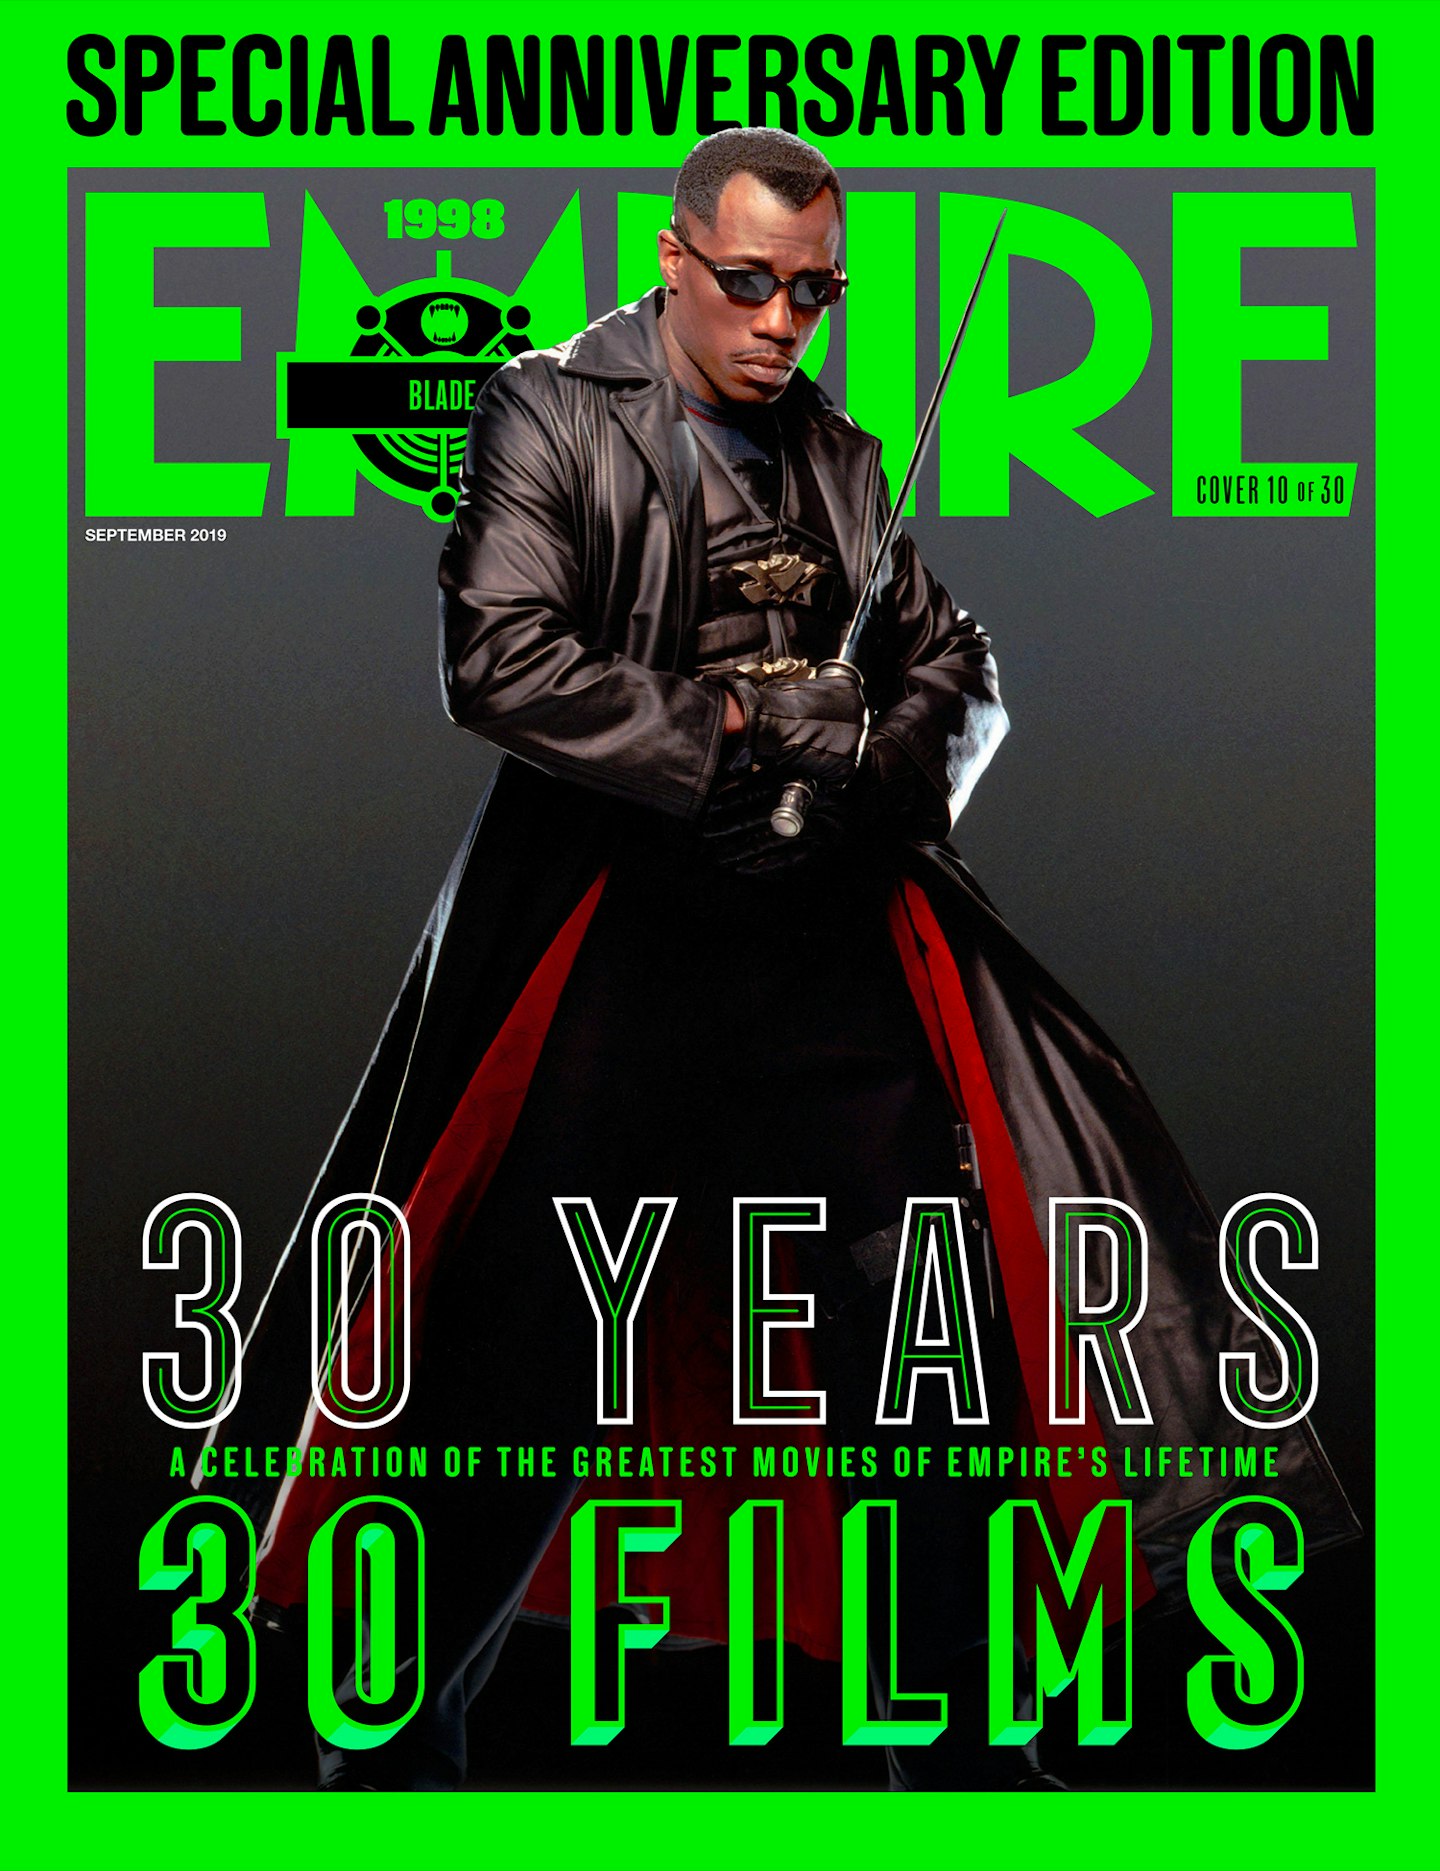 Empire's 30th Anniversary Edition Covers – Blade